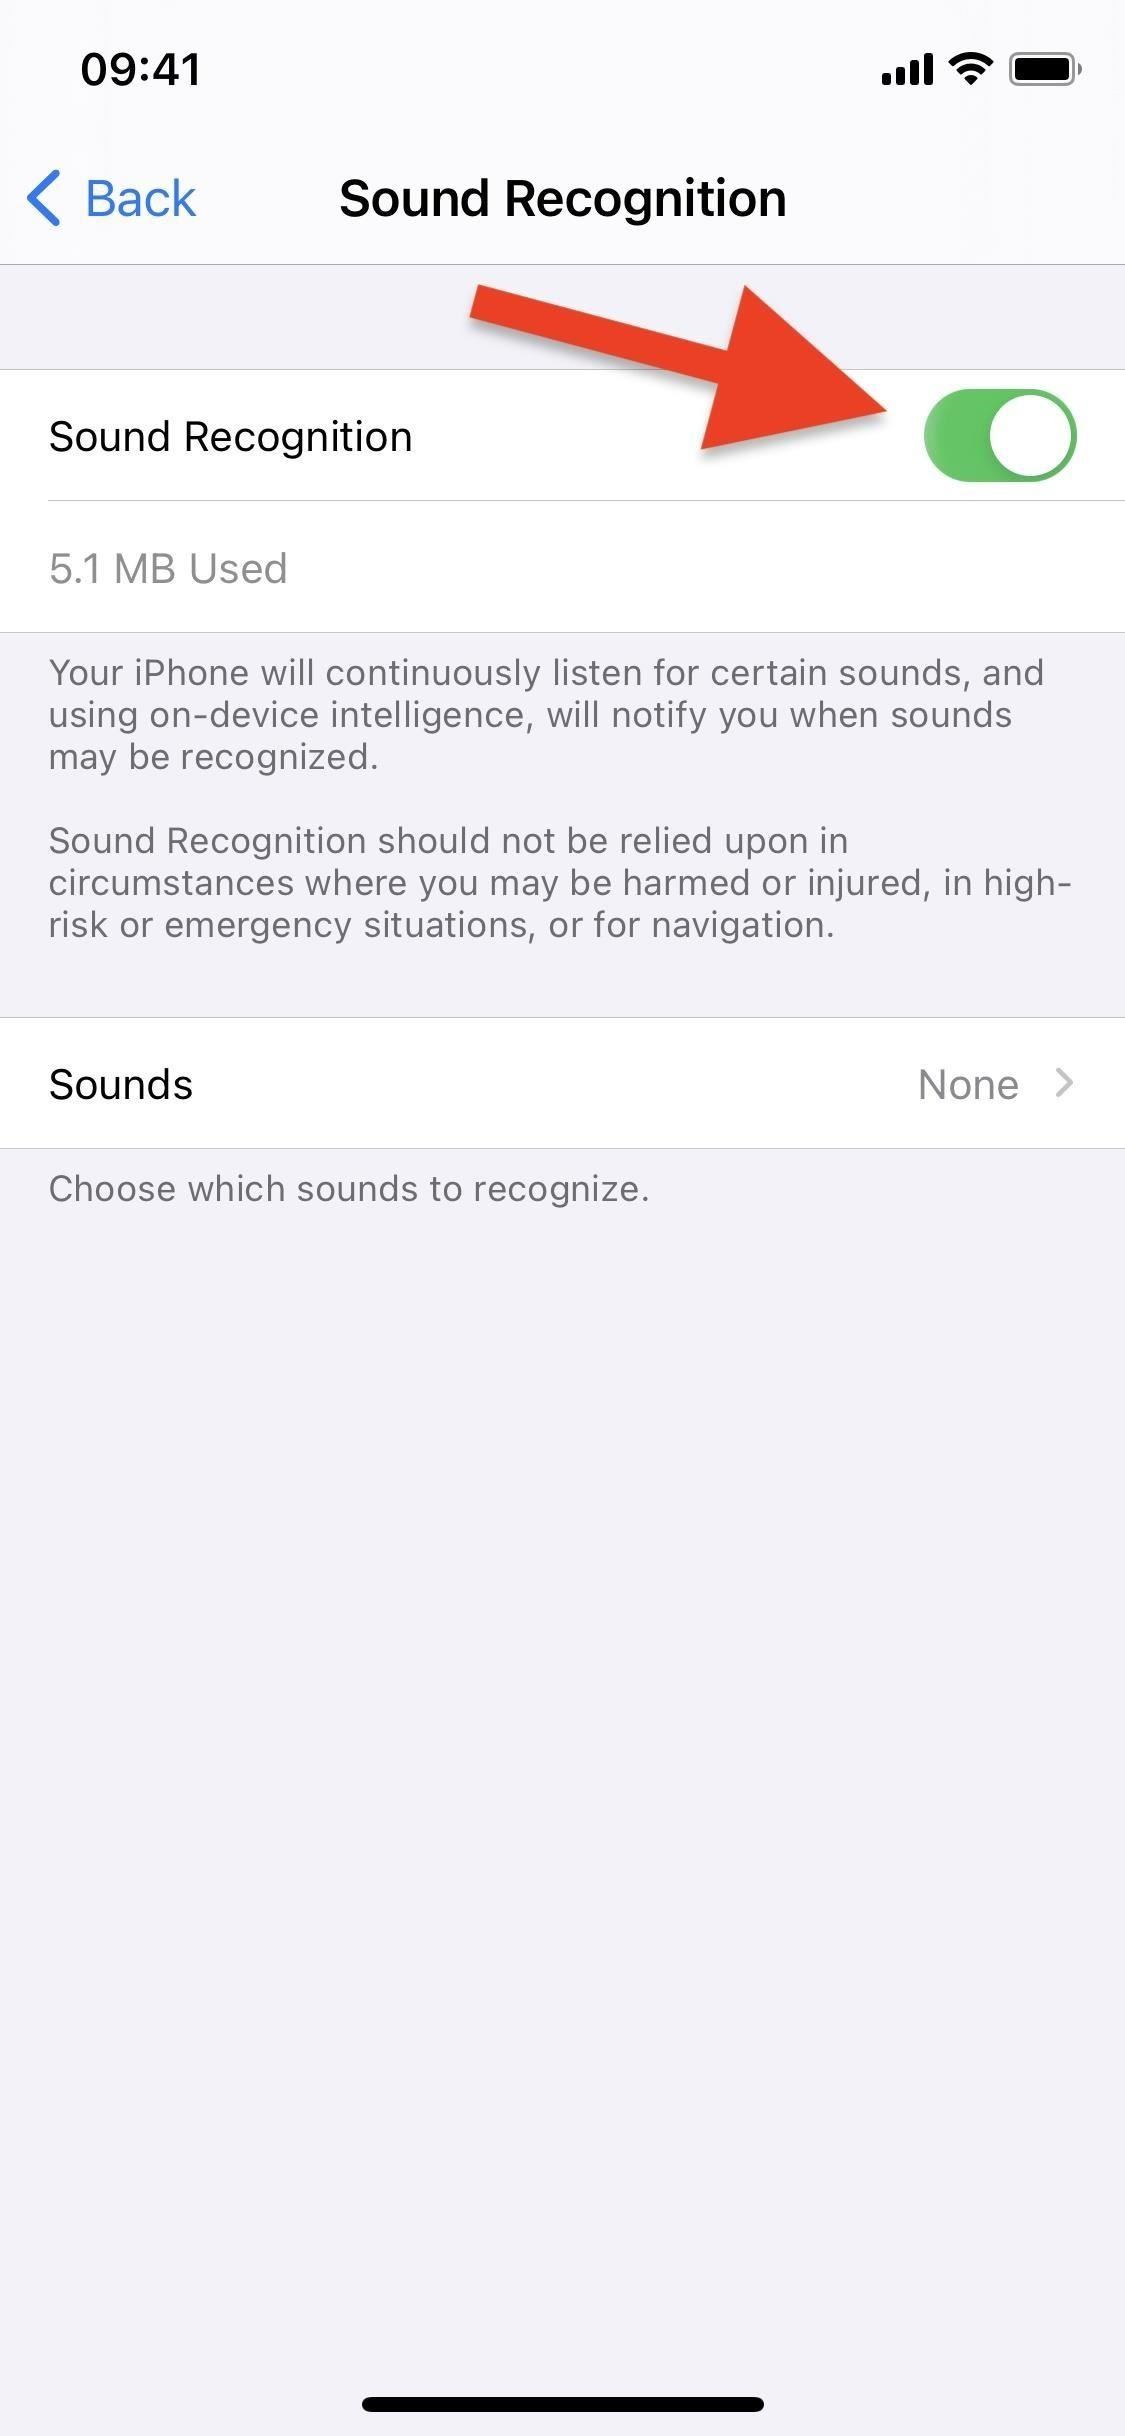 Your iPhone Can Detect & Alert You to Sounds Around You in iOS 14, Like Alarms, Knocking, Cats, Crying & More